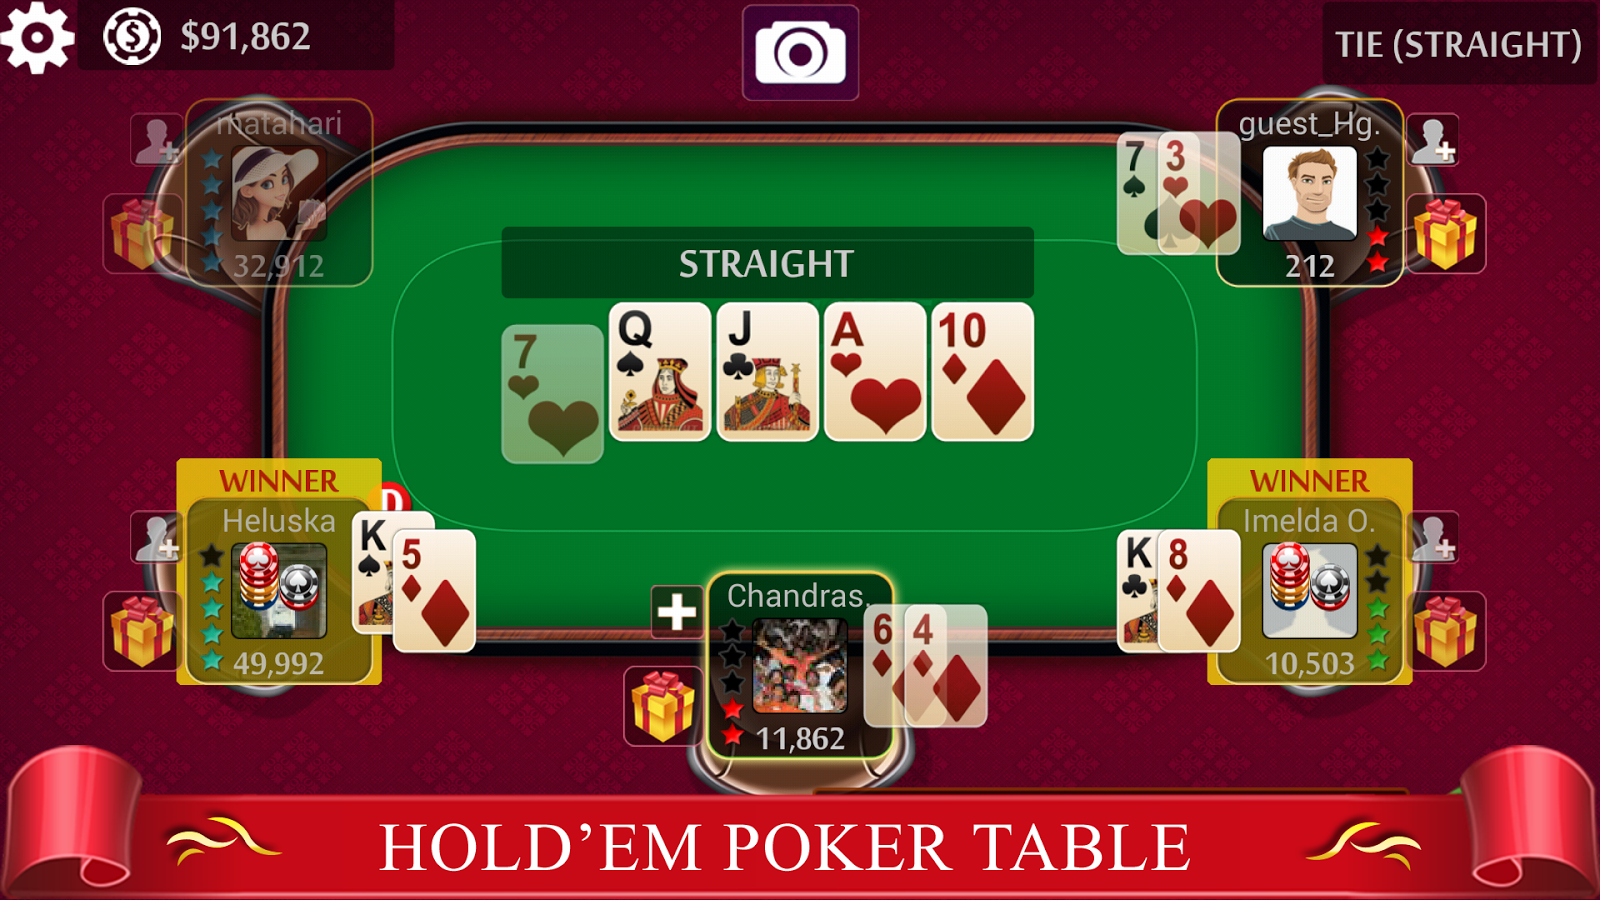 Play poker games free online